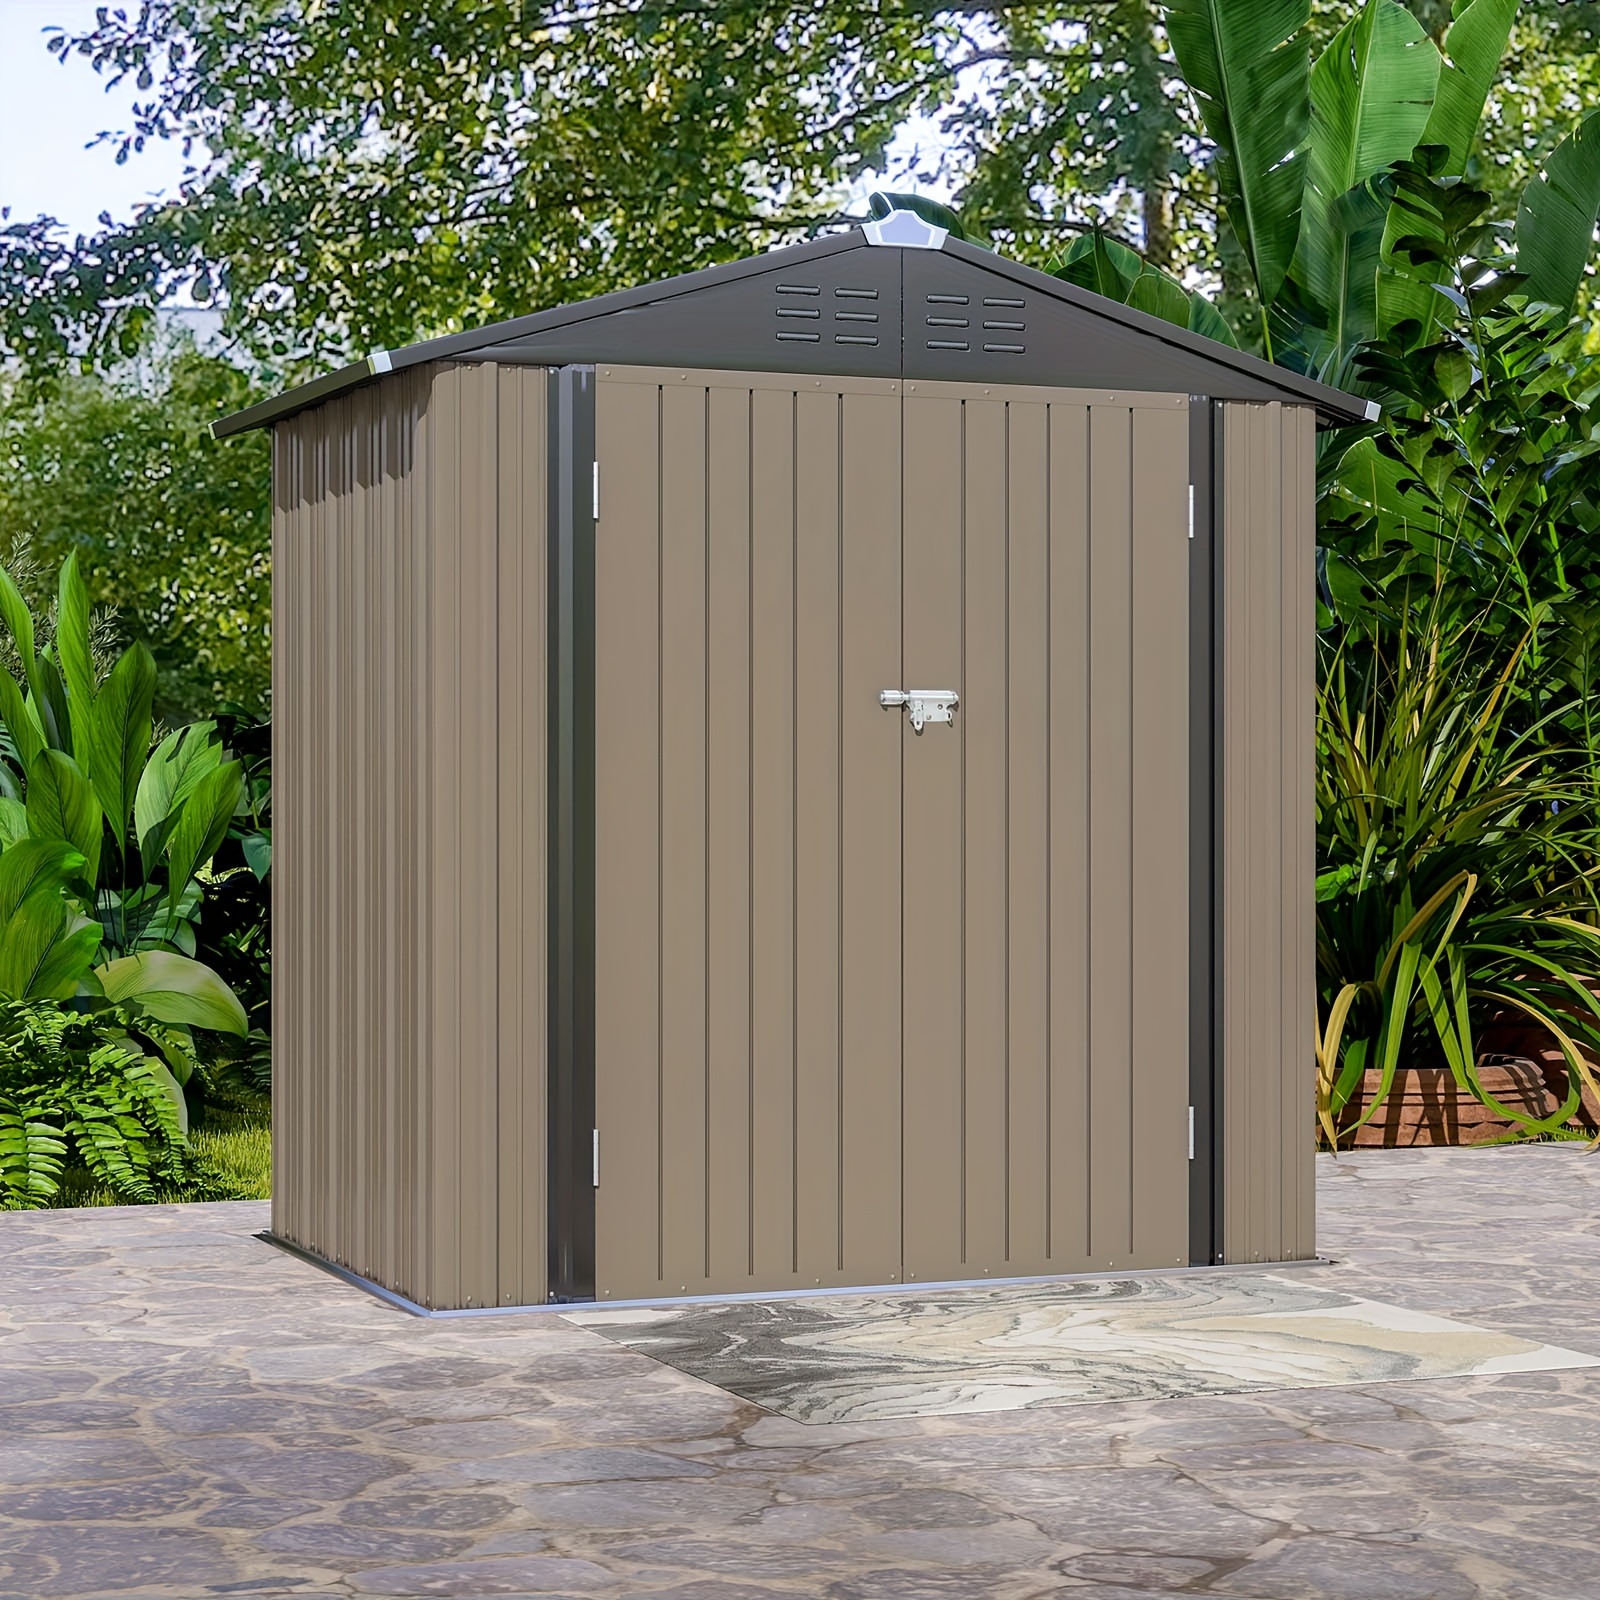 

6ft X 4ft Metal Outdoor Storage Shed, Steel Utility Tool Shed Storage House With Door & Lock, For Backyard Garden Patio Lawn